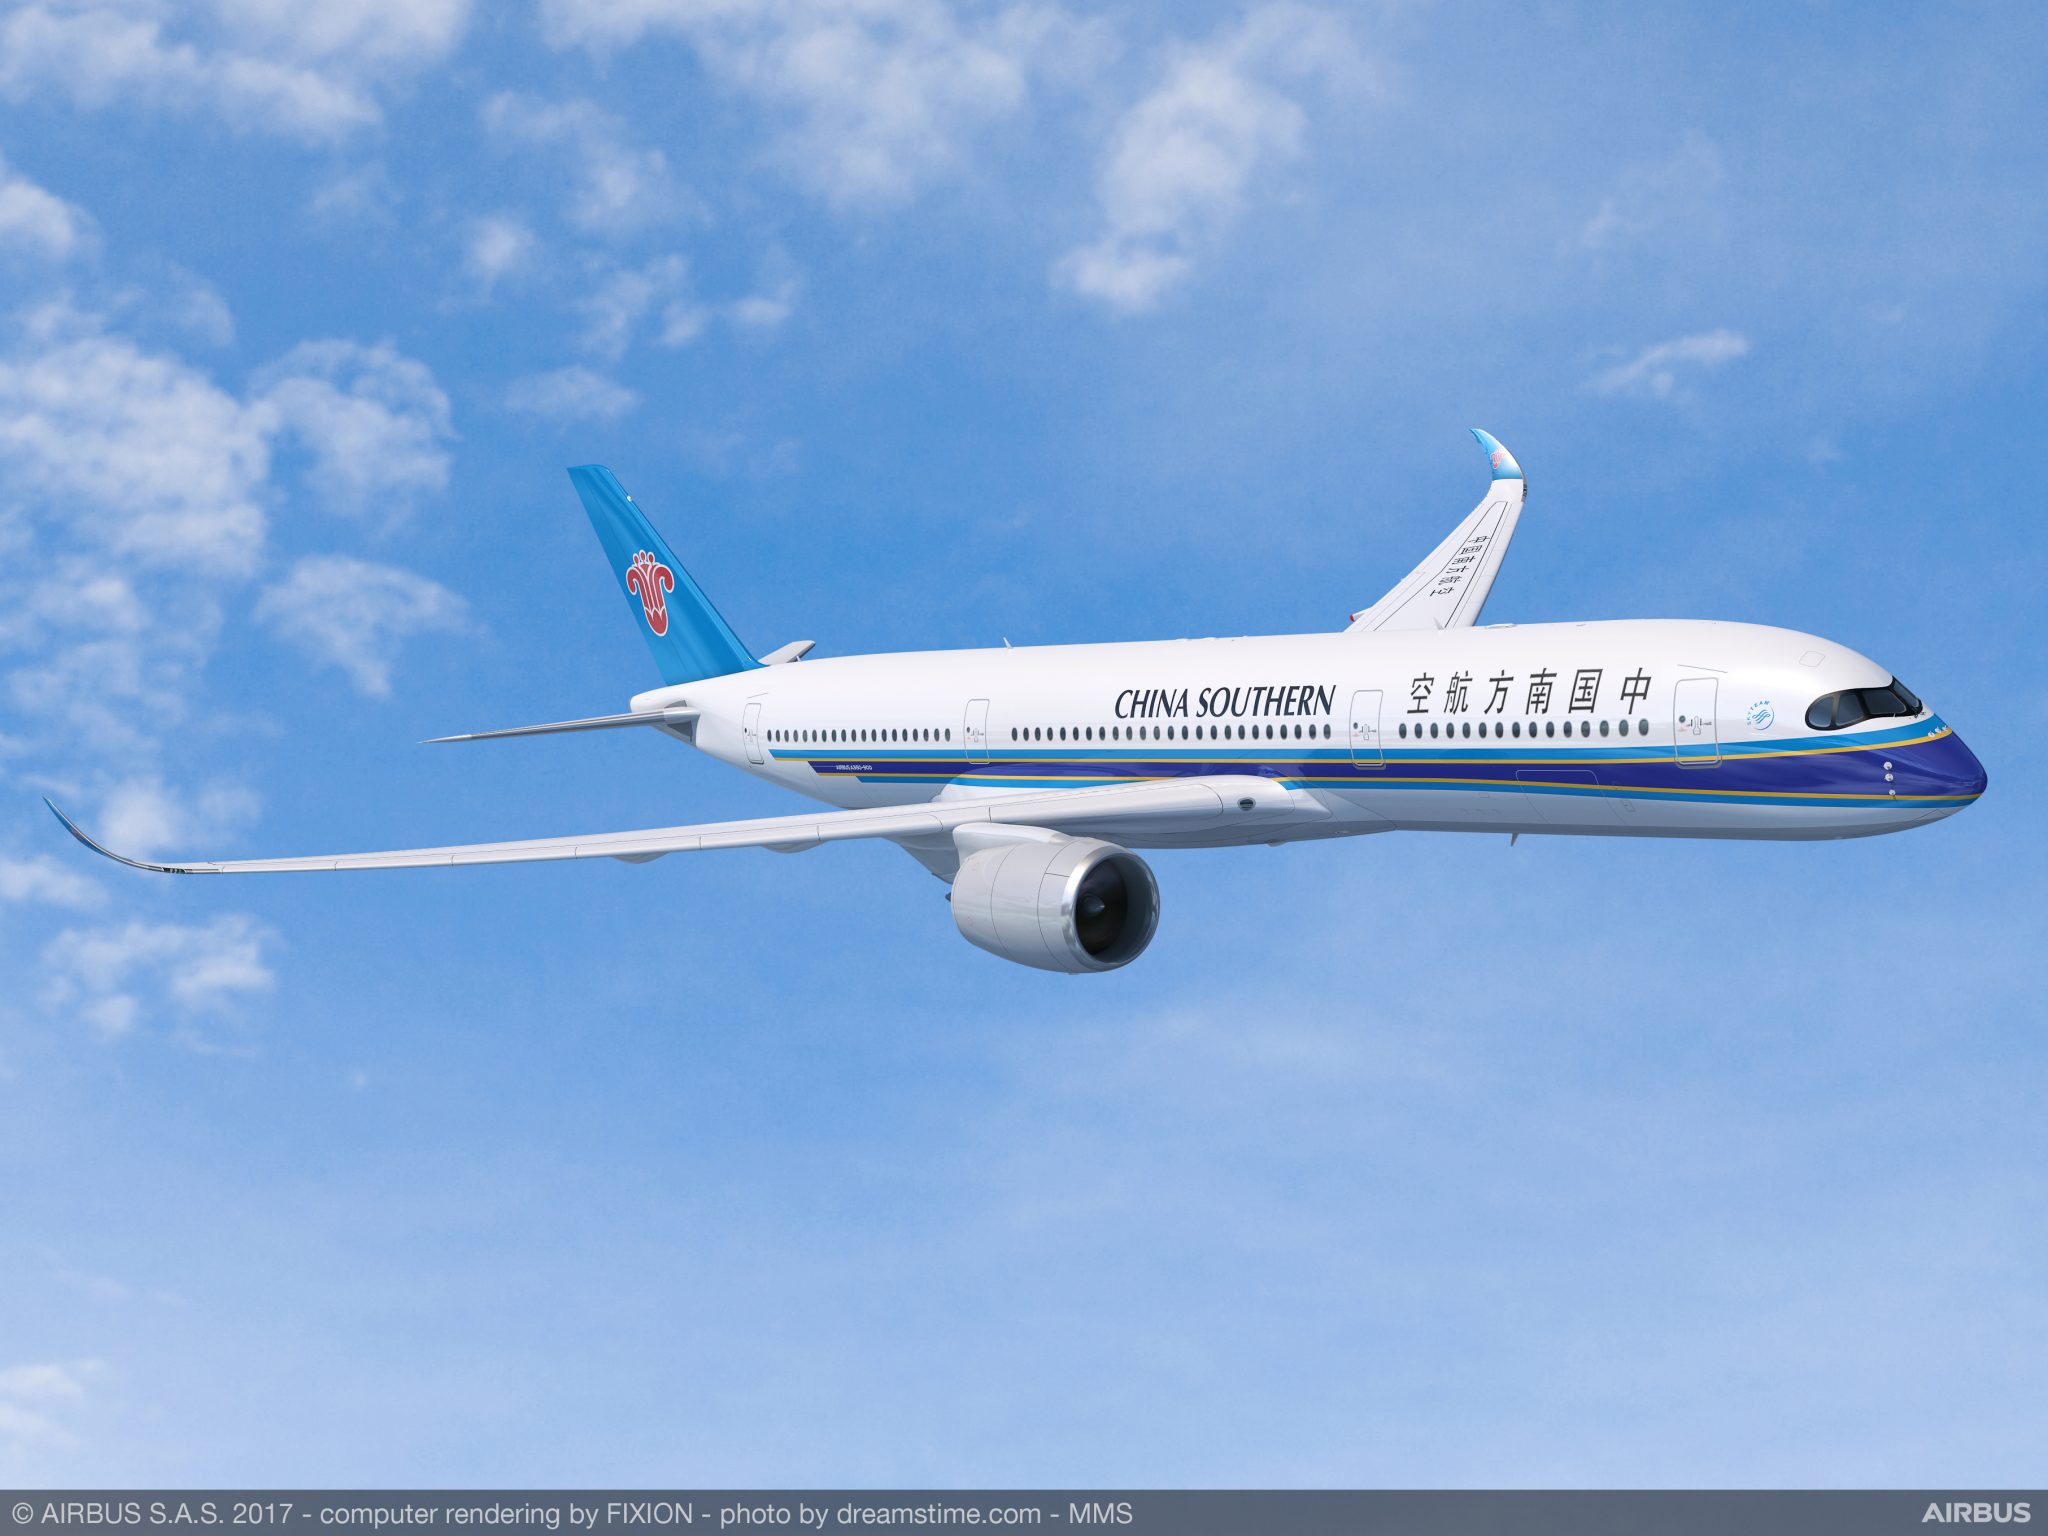 Lufthansa Technik supports APUs for China Southern Airlines’ A350s